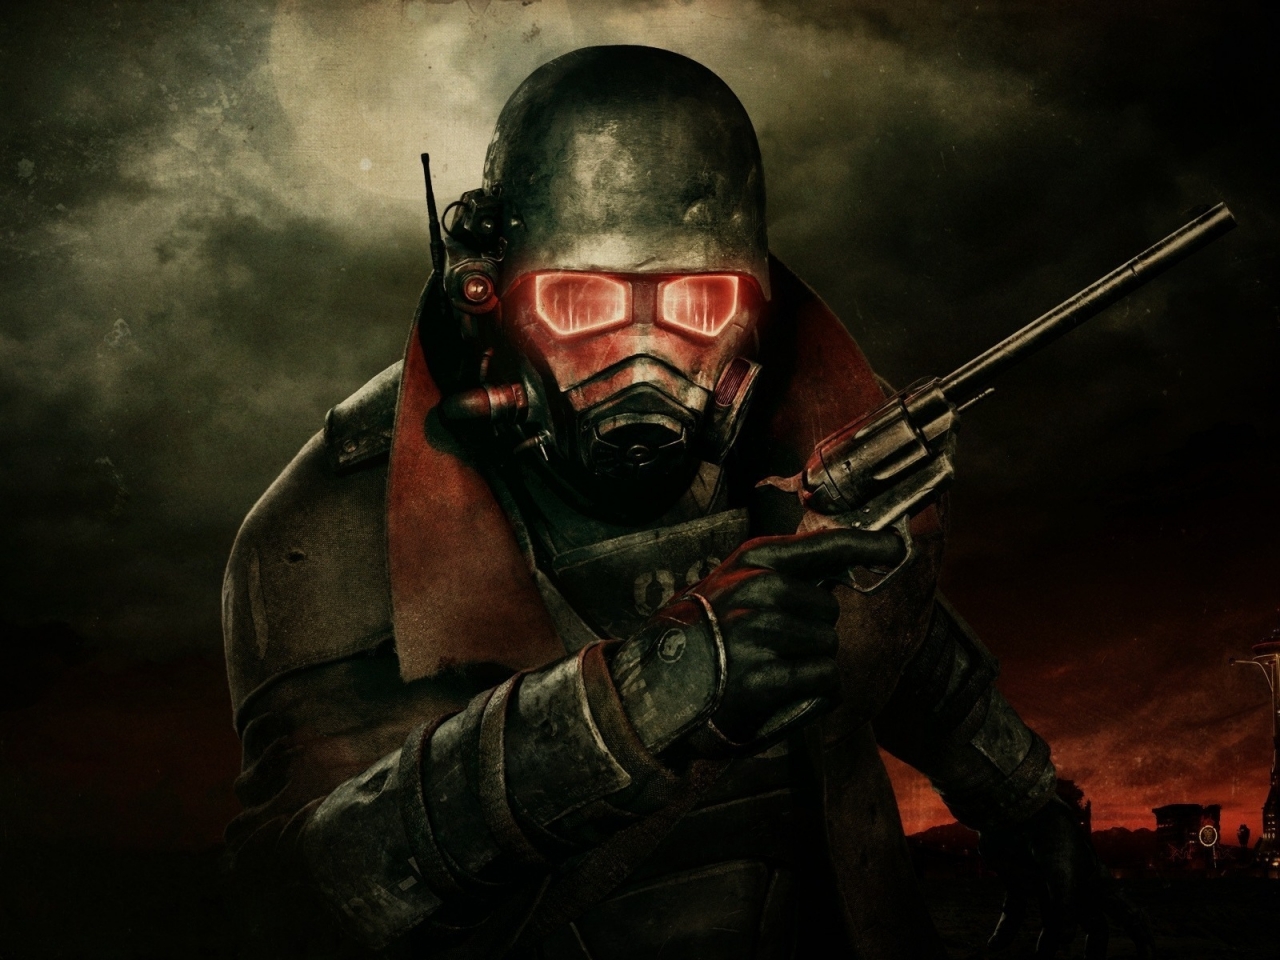 Fallout 3 New Vegas for 1280 x 960 resolution